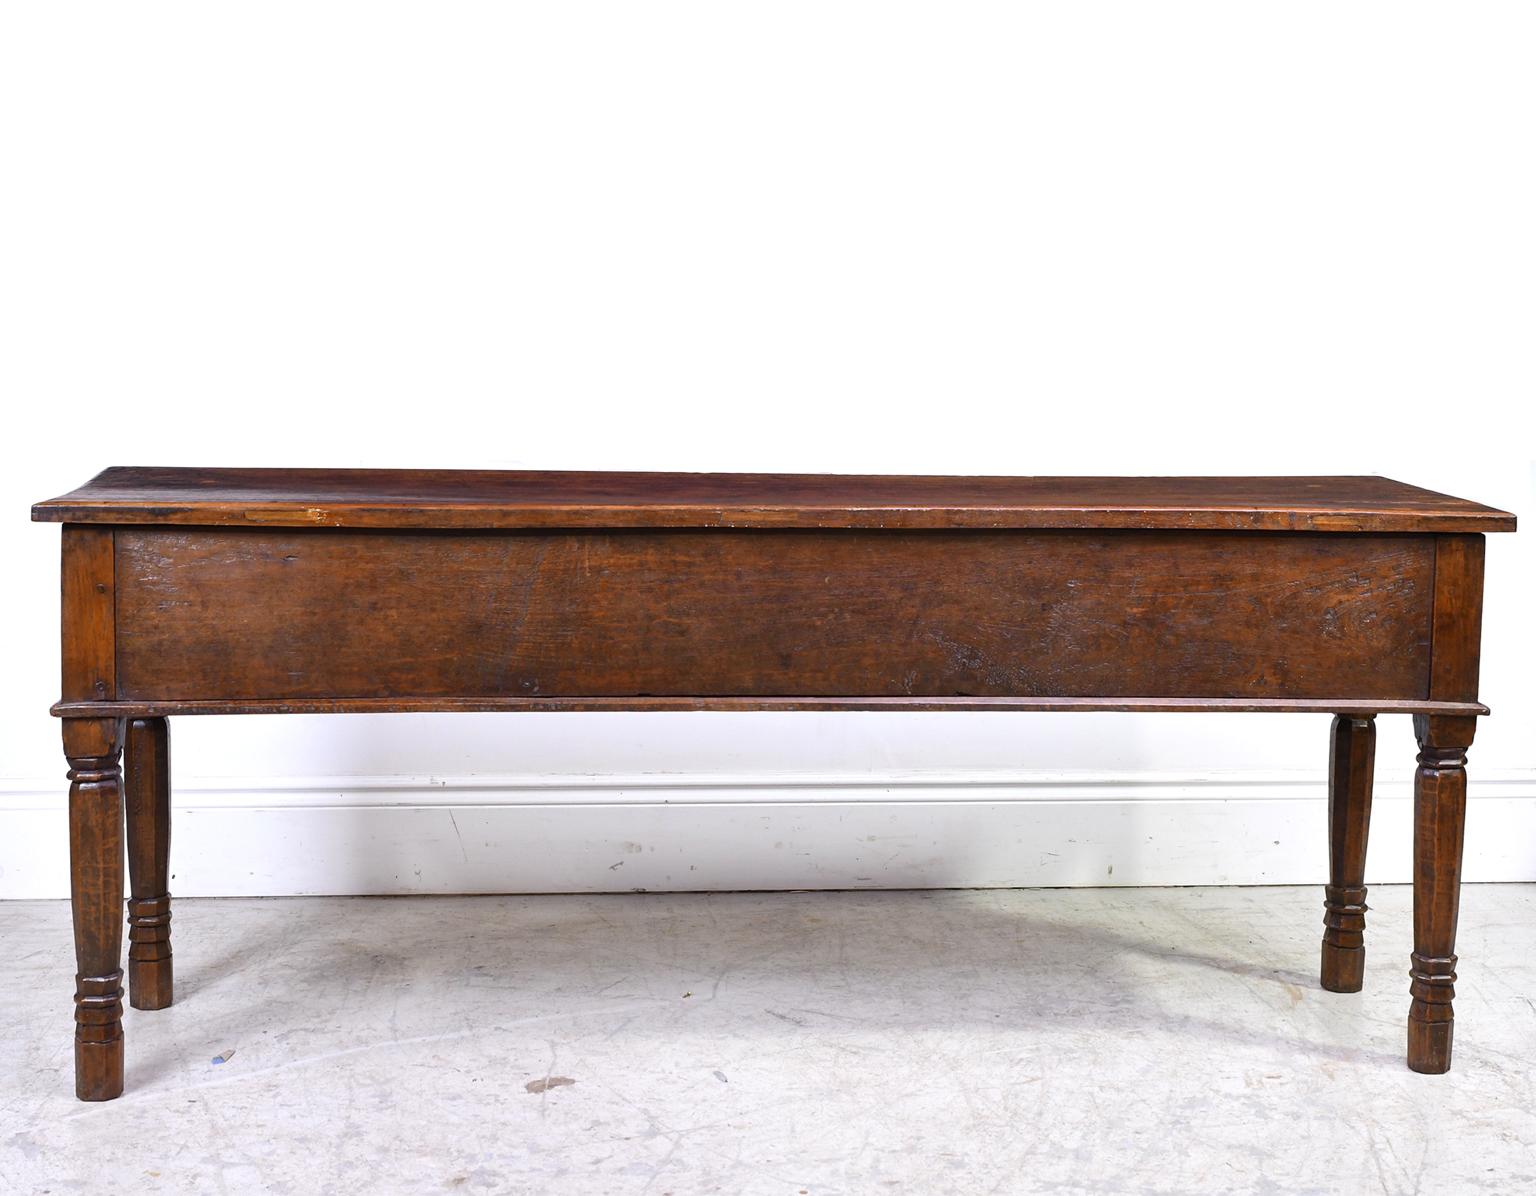 Indonesian 19th Century Dutch East Indies Farmhouse Table or Sideboard in Teak with Drawers